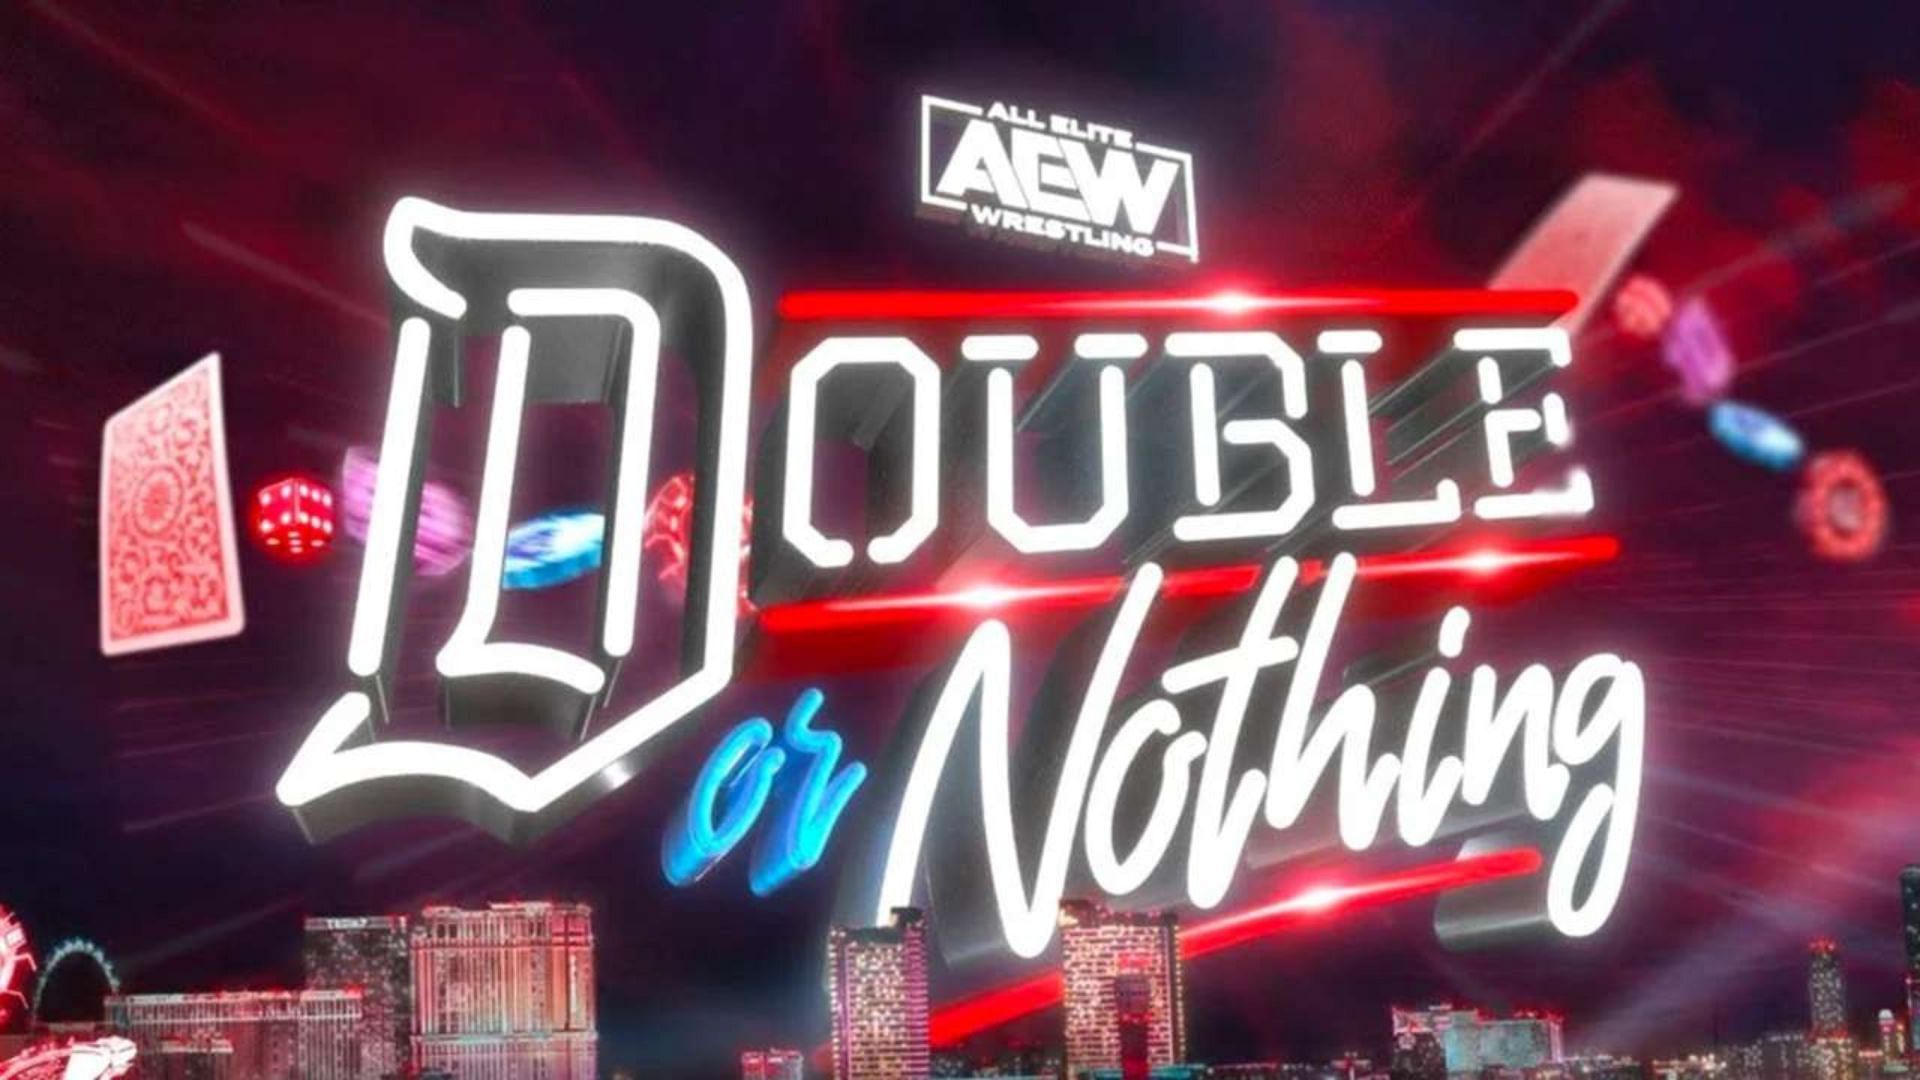 AEW Double or Nothing had a major surprise in store